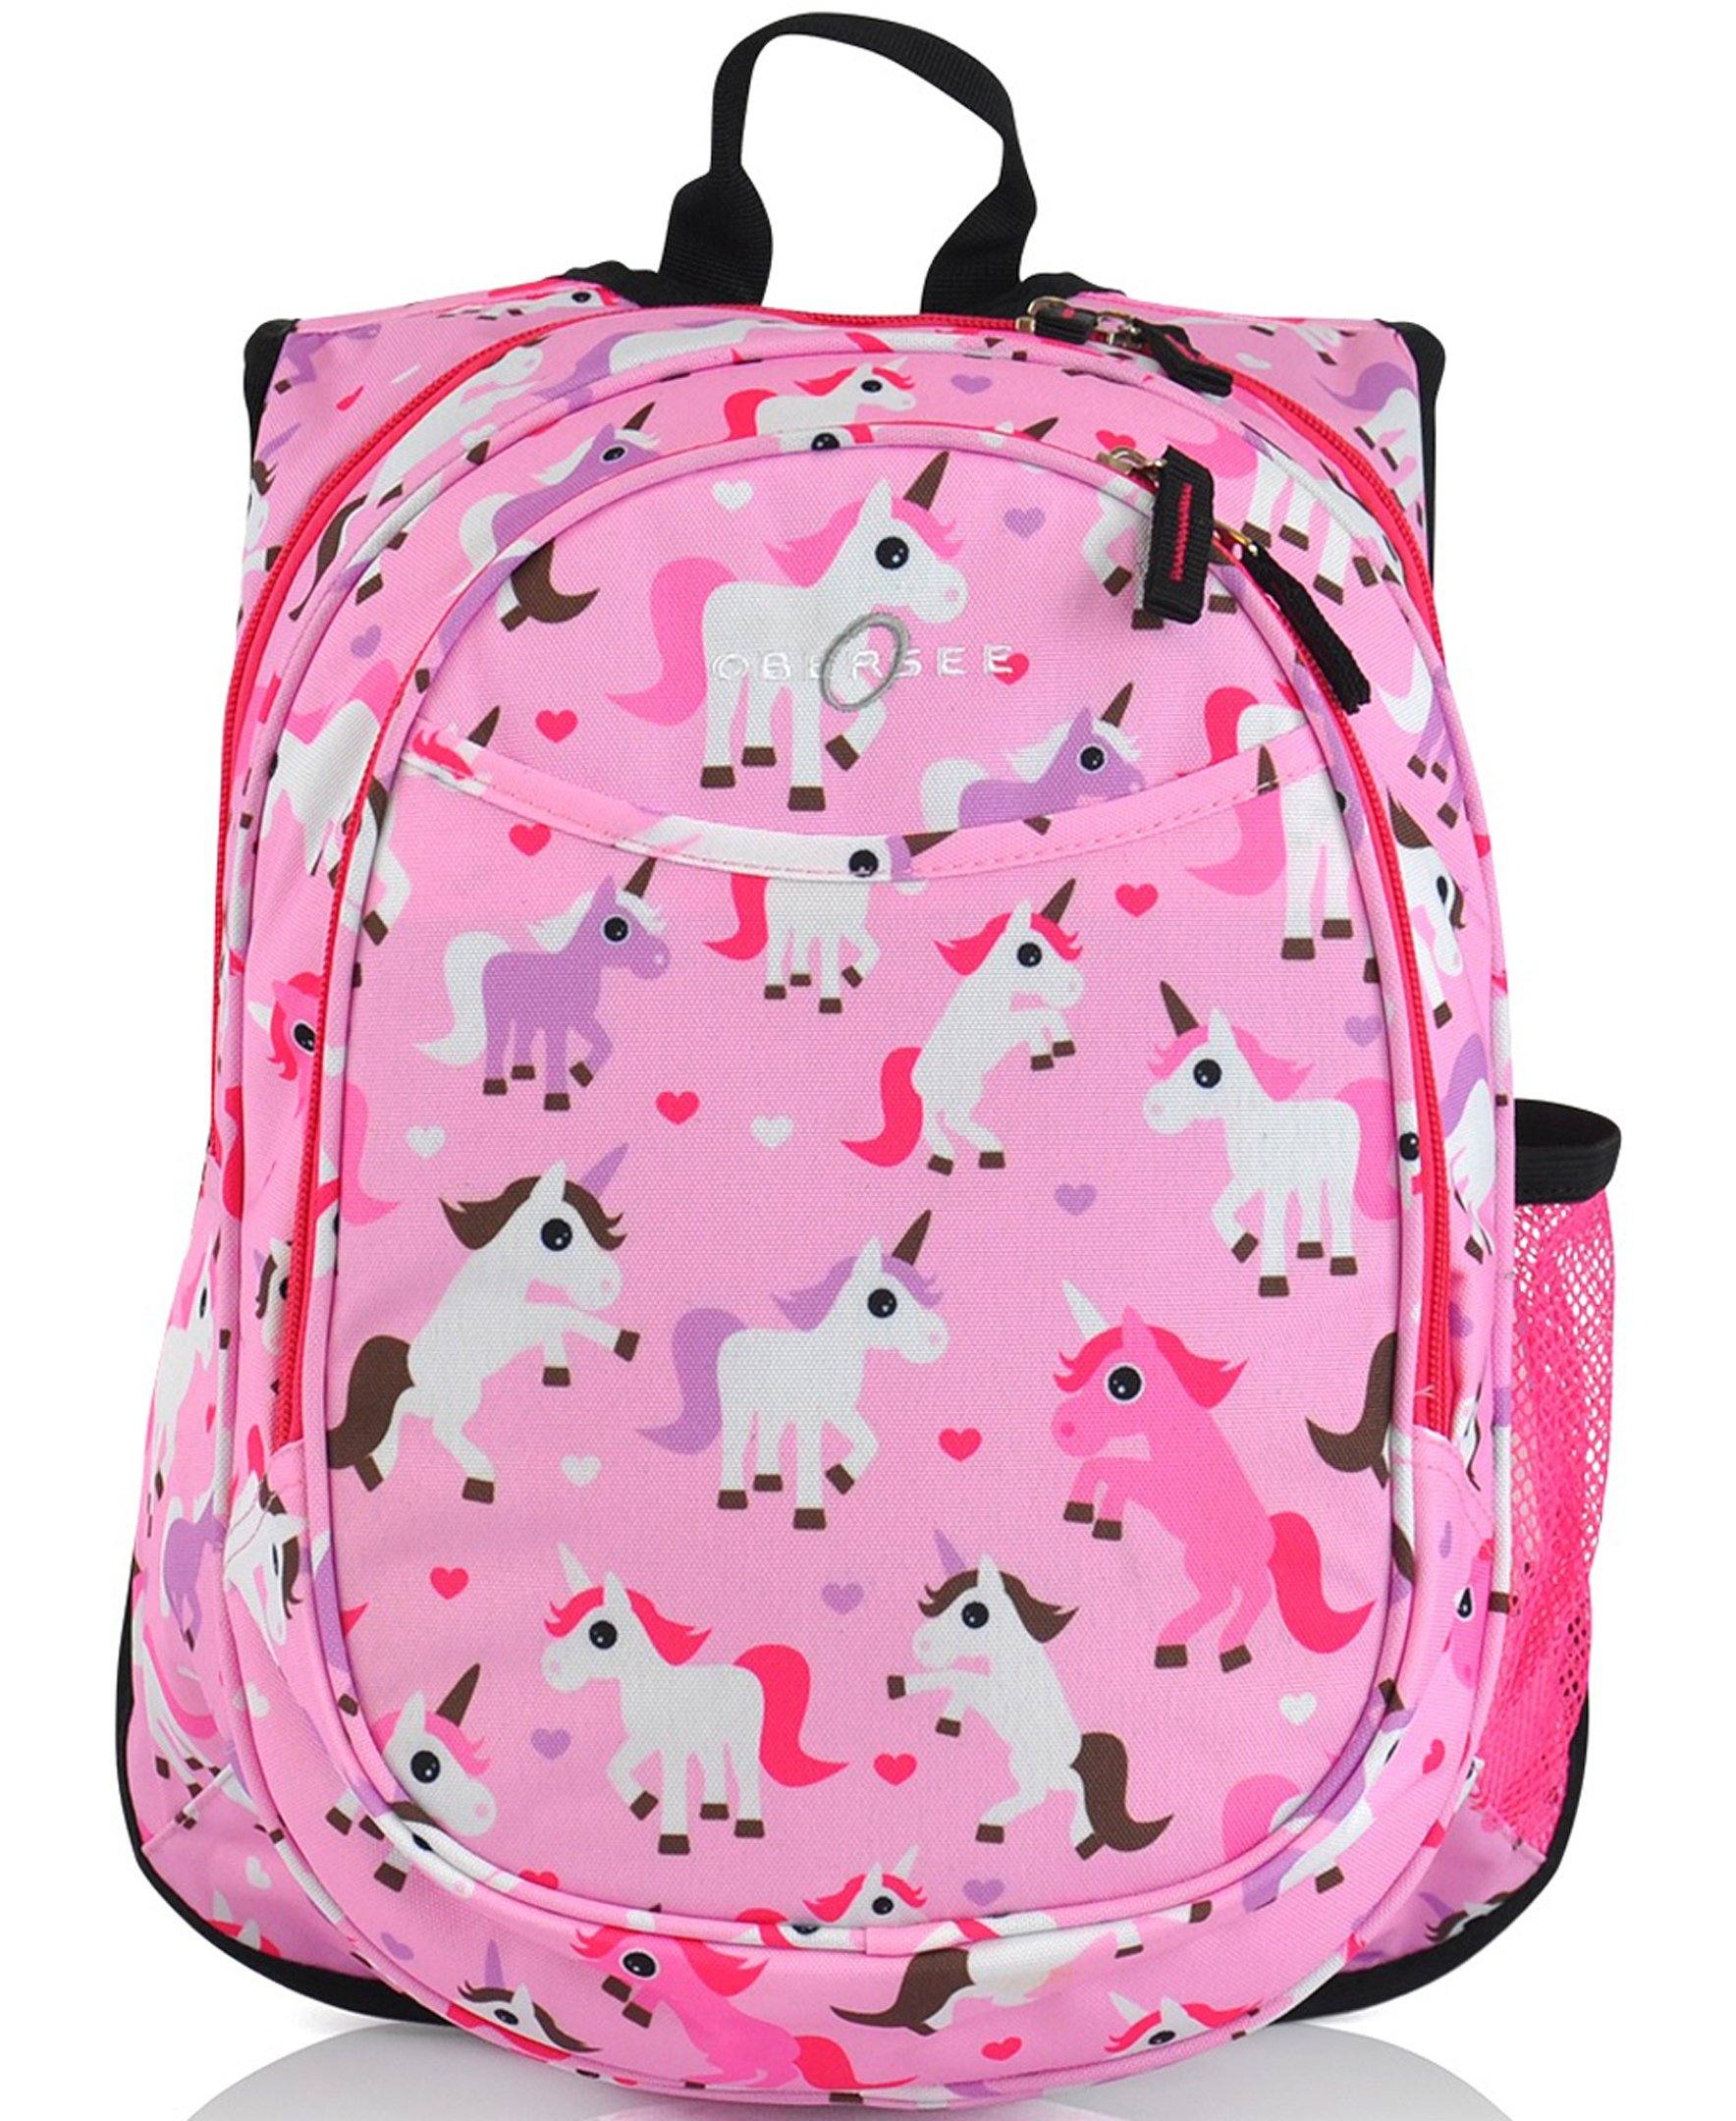 O3KCBP020 Obersee Mini Preschool All-in-One Backpack for Toddlers and Kids with integrated Insulated Cooler | Unicorn - image 1 of 5